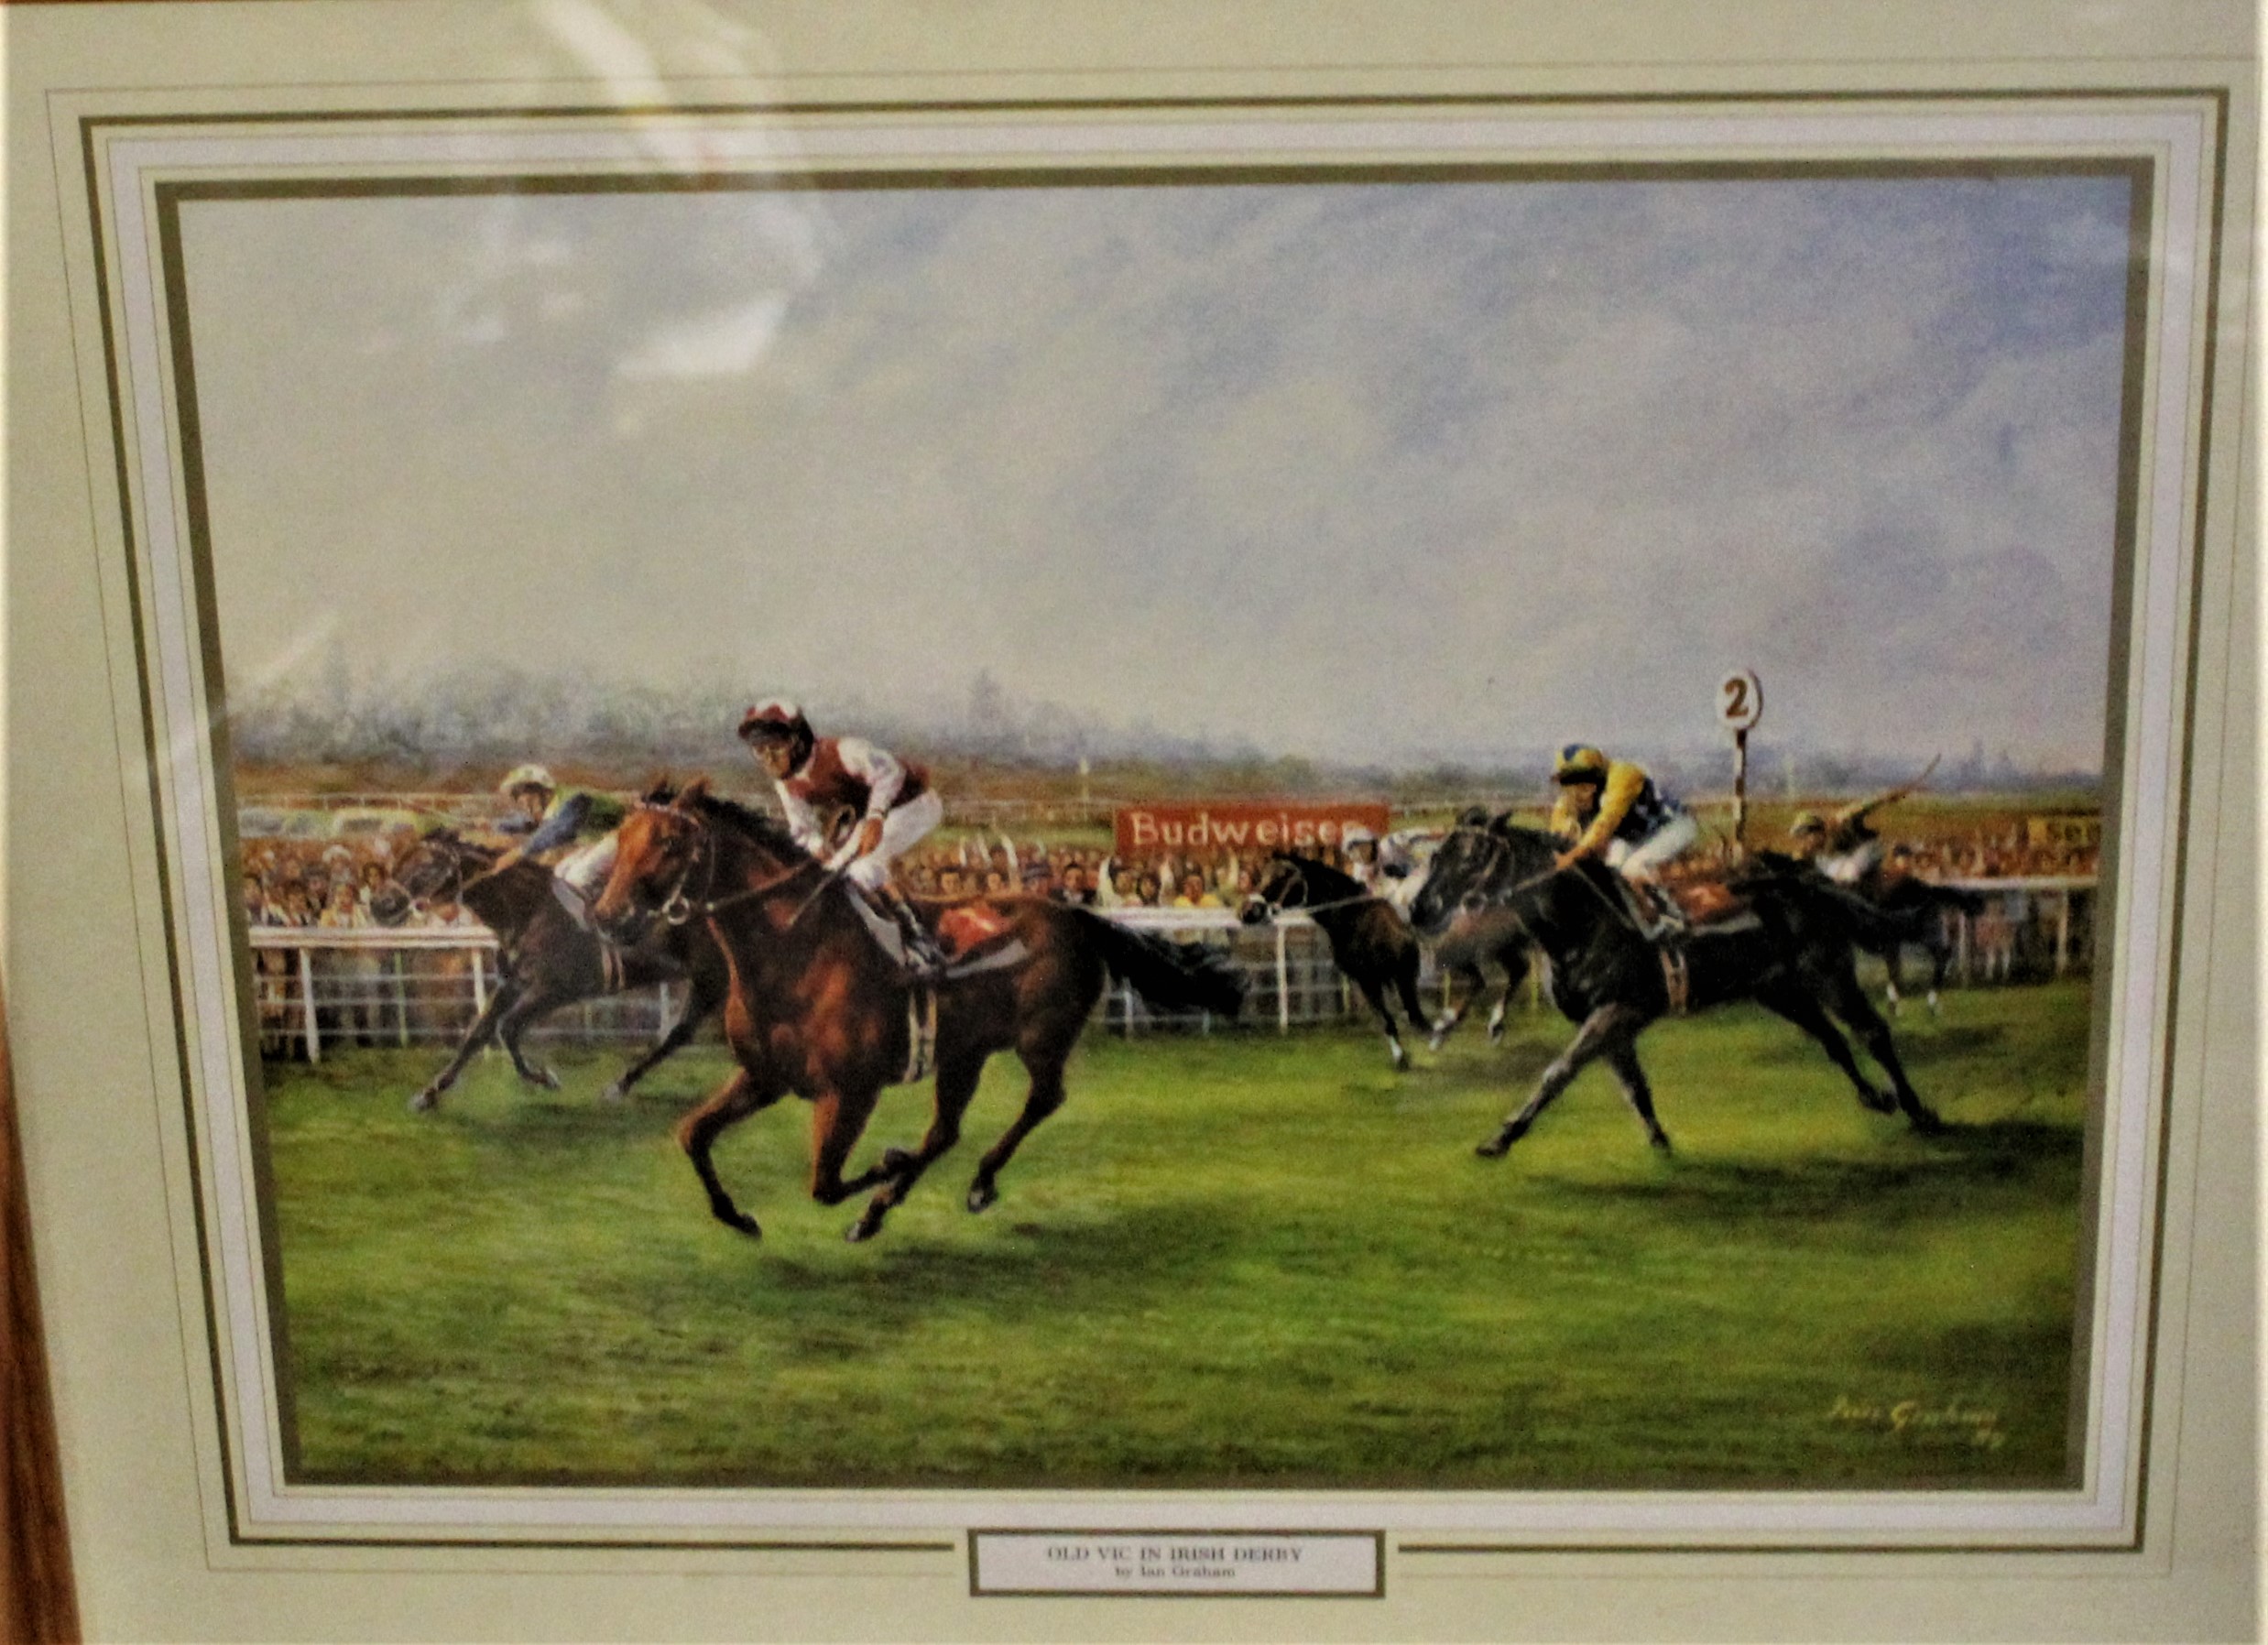 Old Vic in Irish Derby'-by Ian Graham signed in 1989-measurements 59cm x 49cm-coloured print-